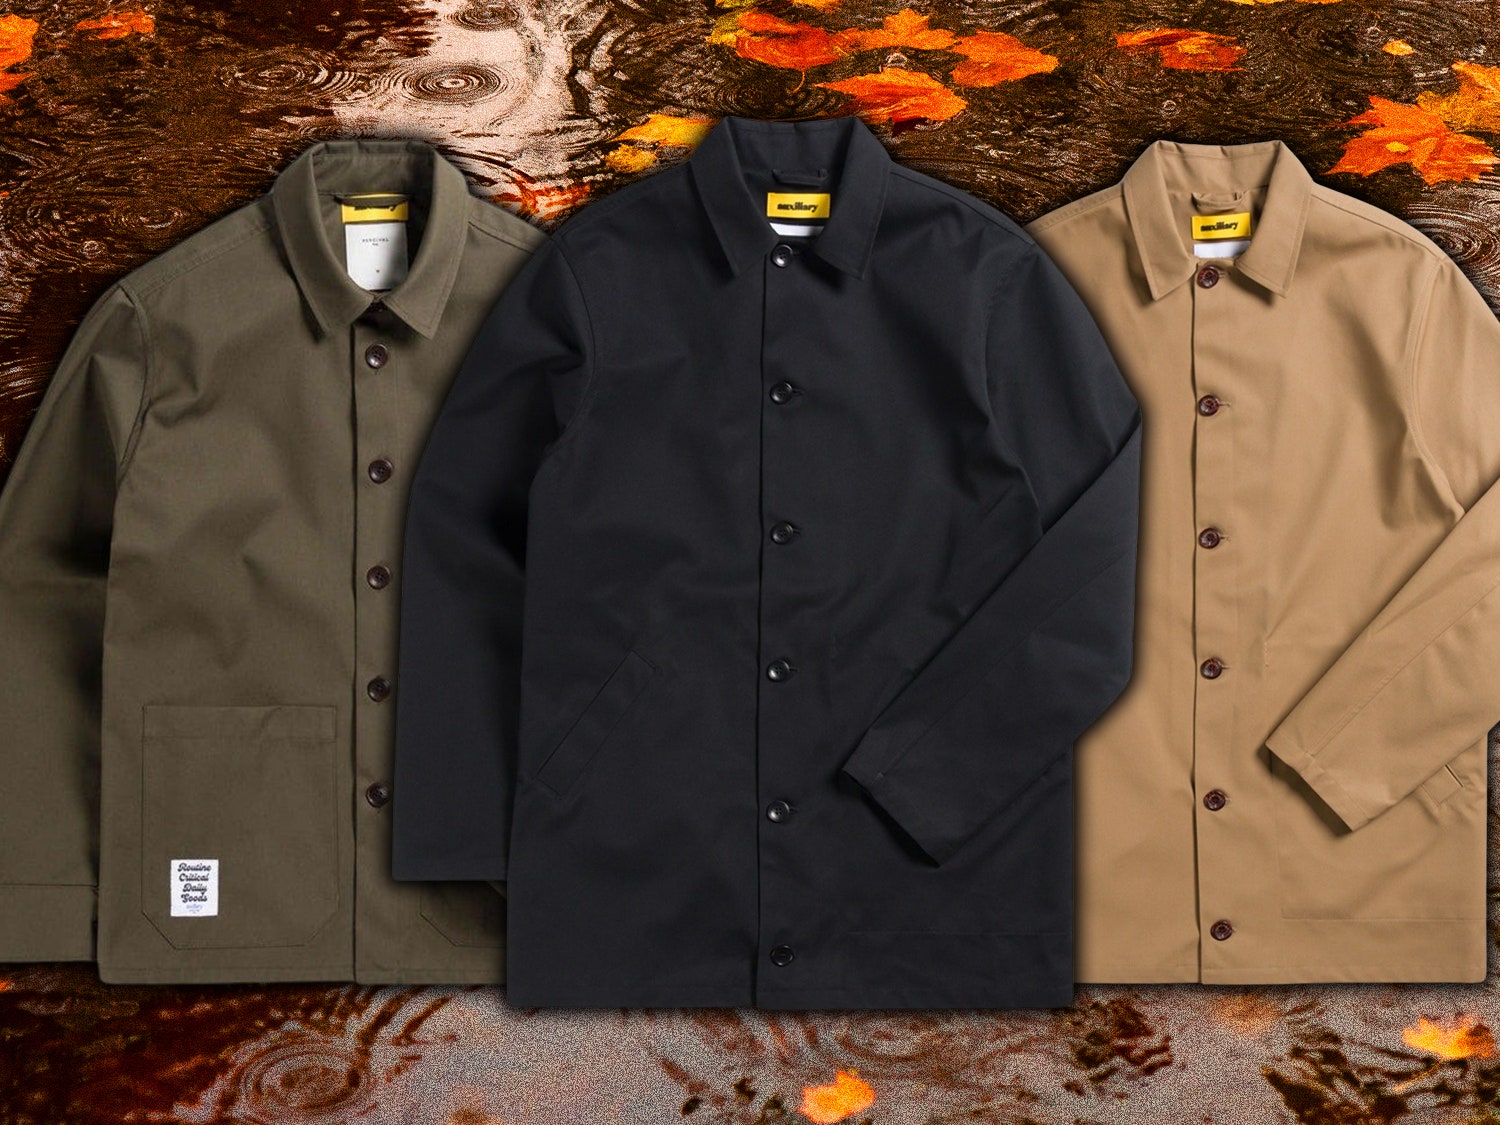 Act Fast to Snag a Rare Discount on a Very Gentlemanly Trench